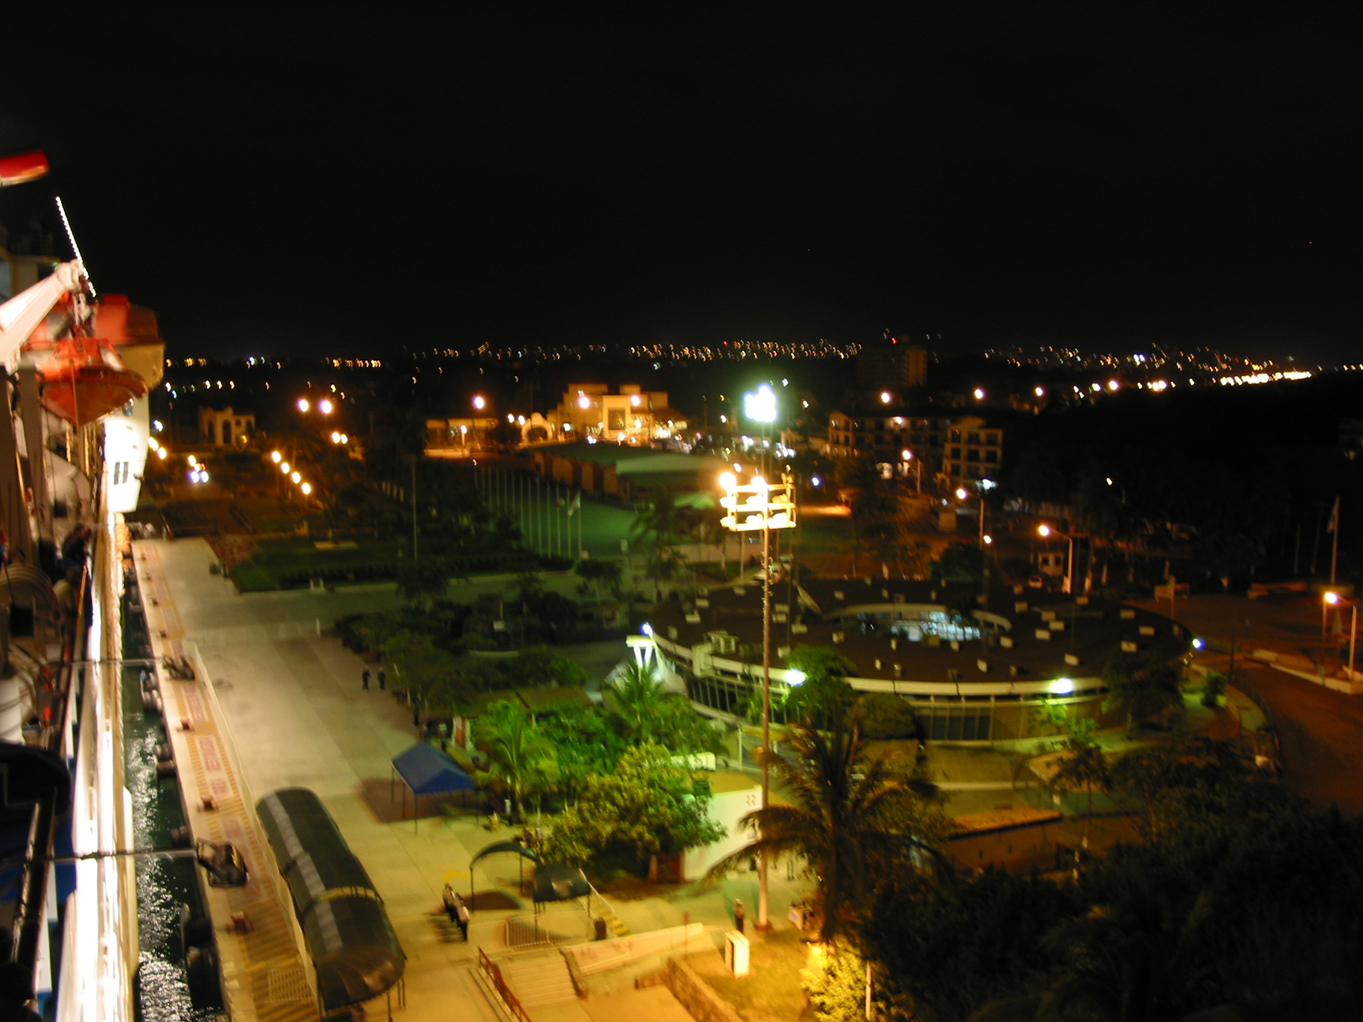 Another nightime view of Puerto Viarta. We need more pics of Puerto Viarta, send us your pics! :)